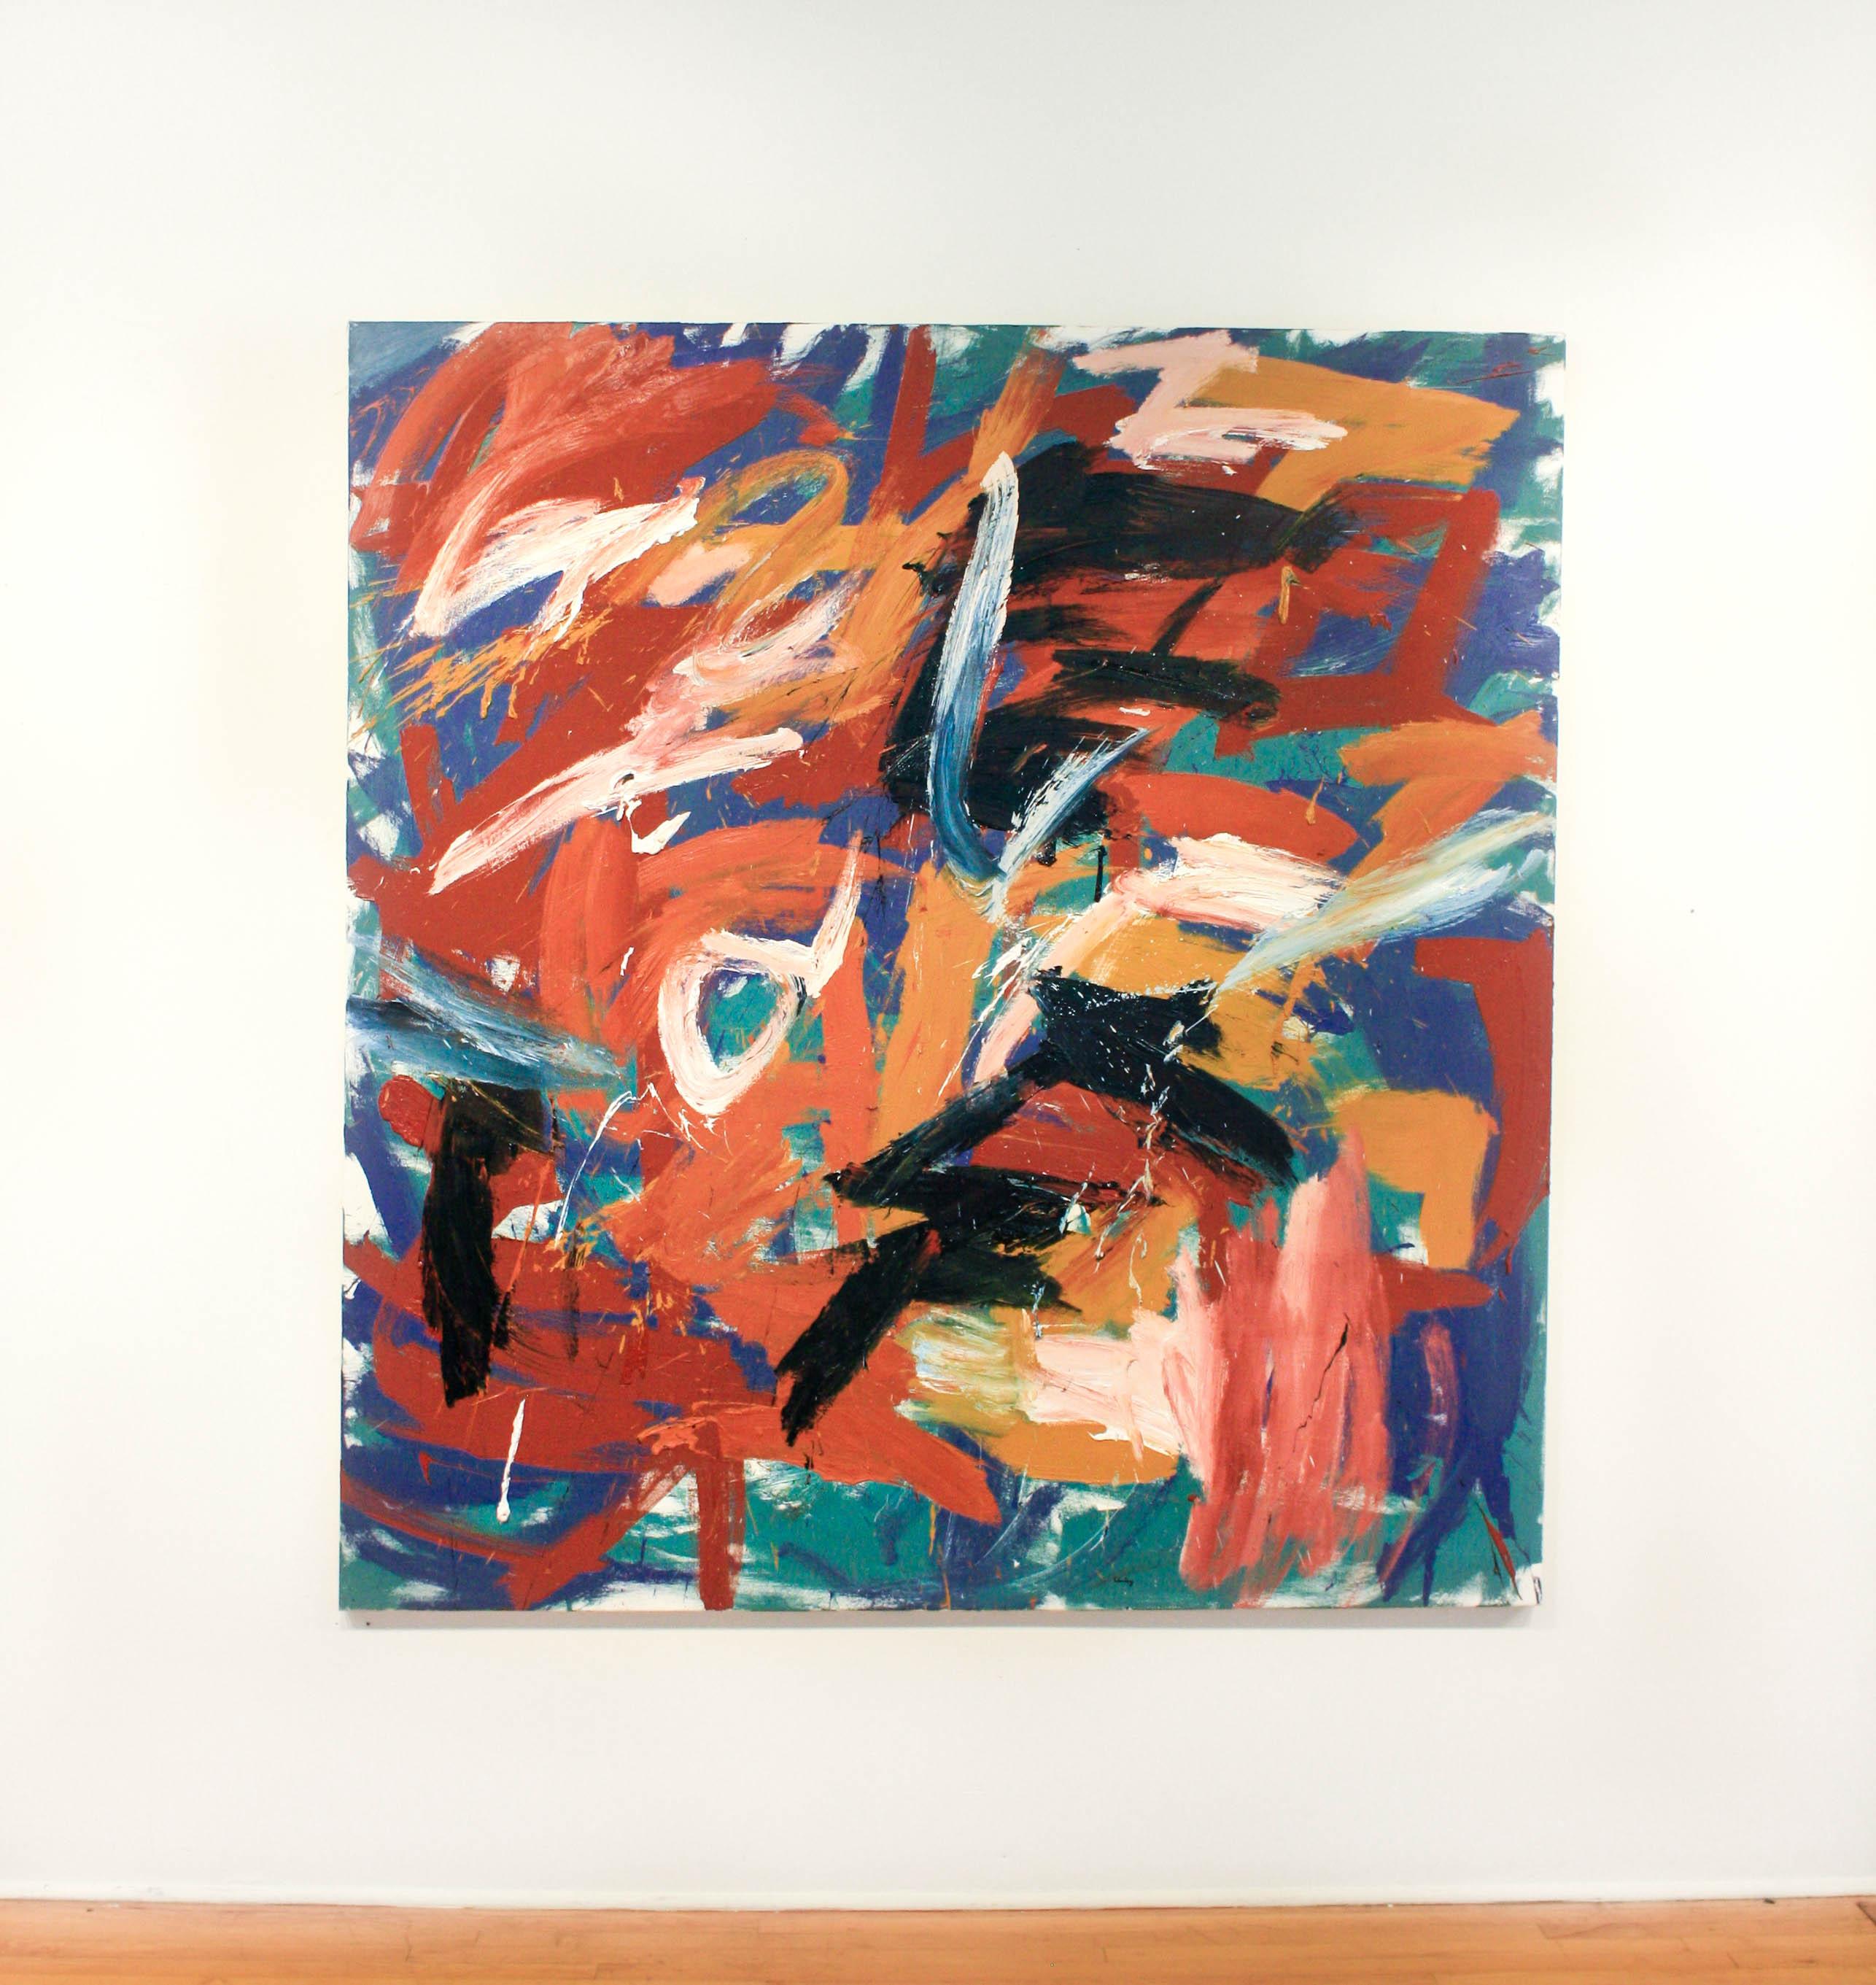 This gestural abstract oil painting is rendered using blue, green, orange, red, yellow, pink, and white.

